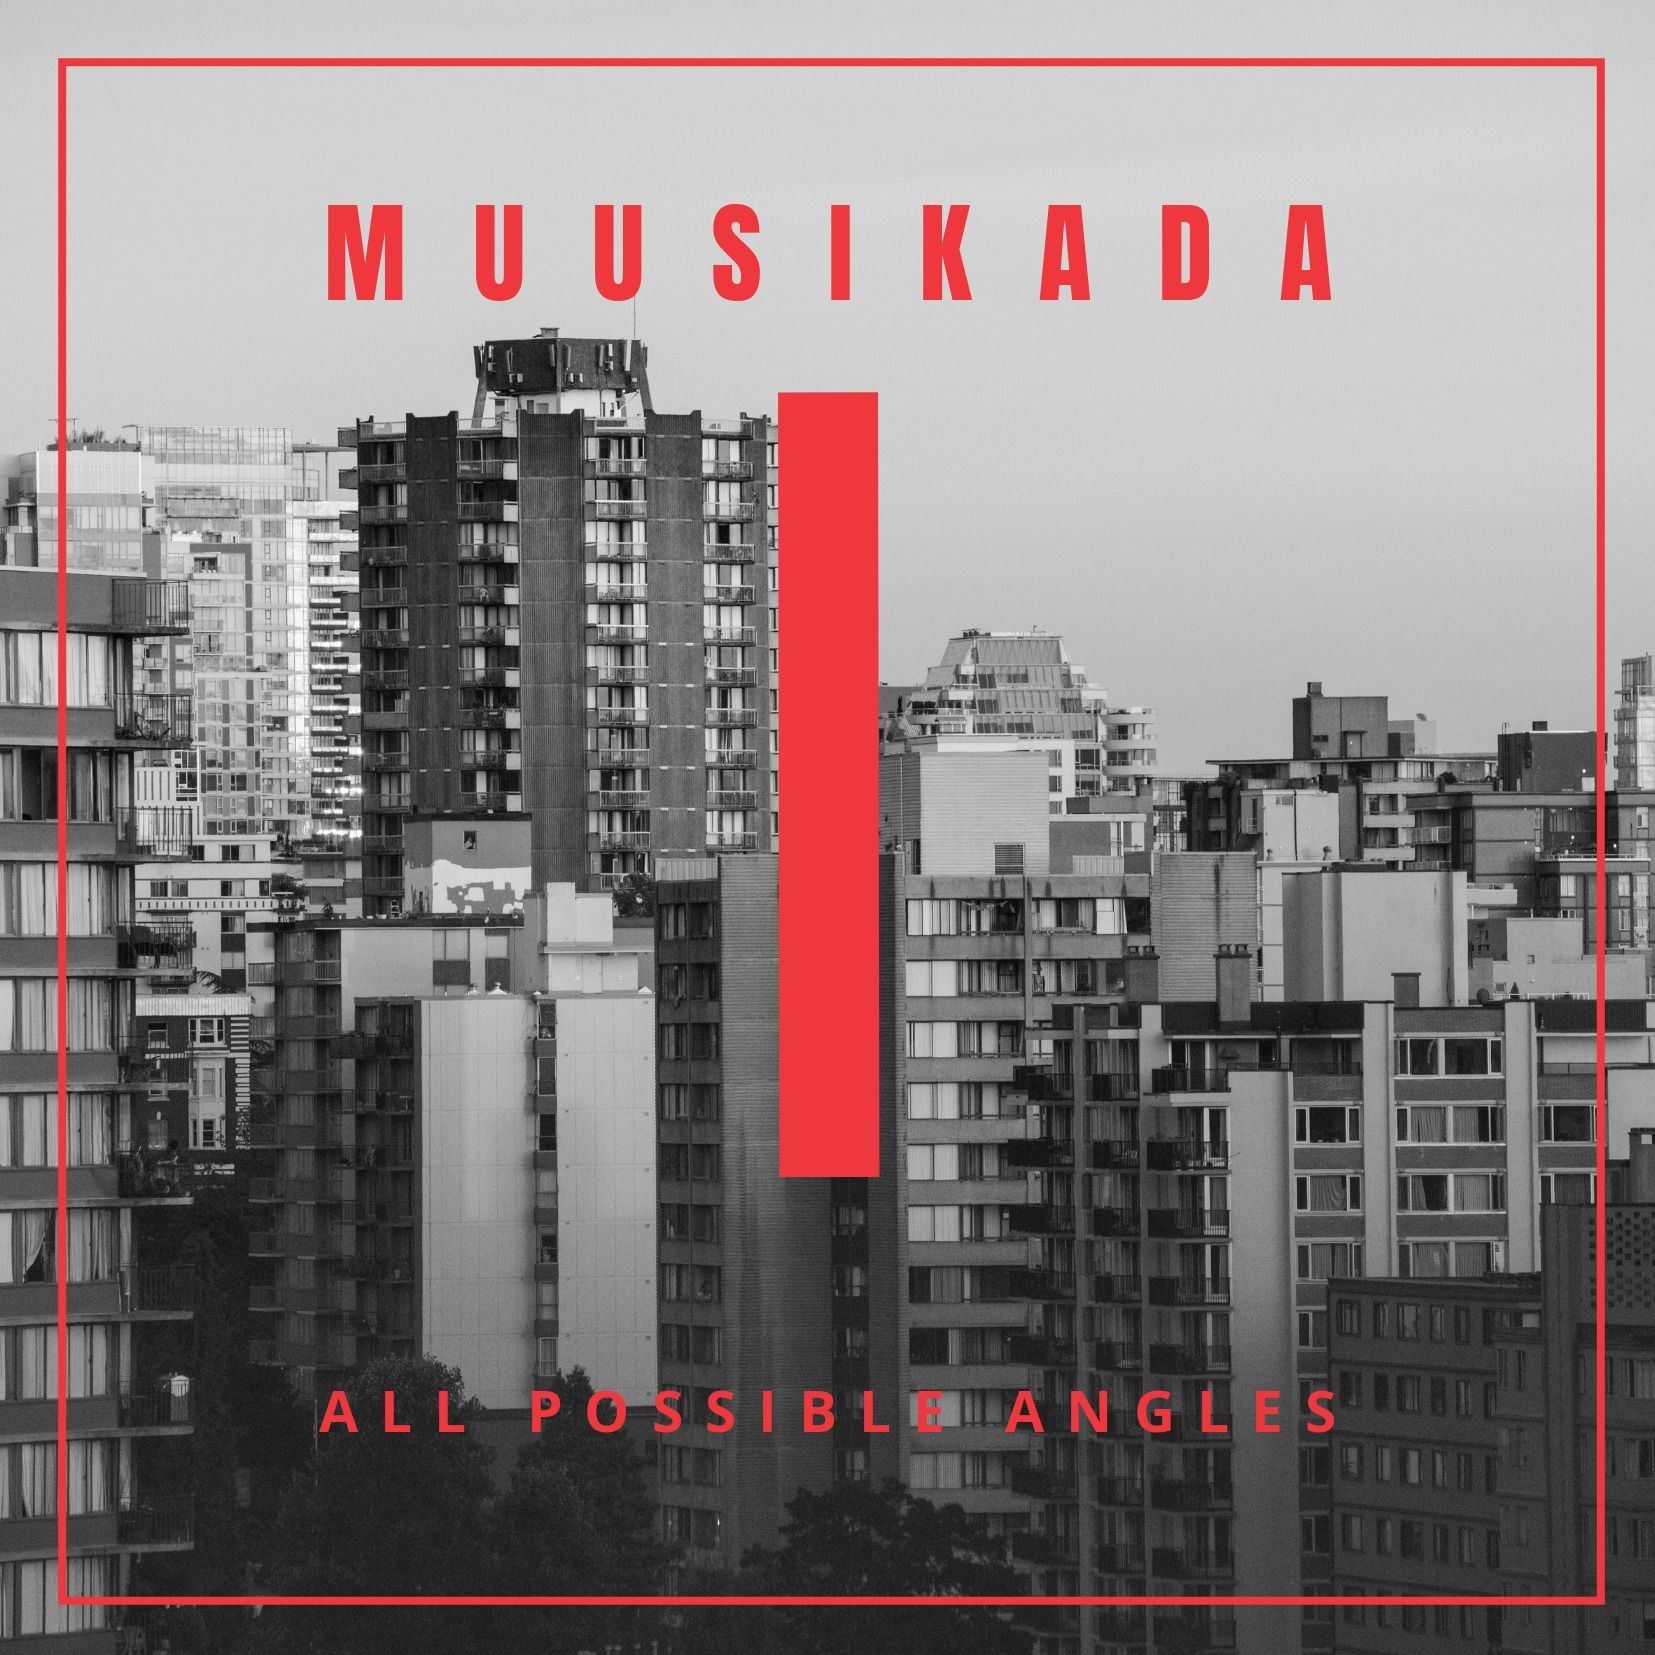 Grey cityscape album art with red text - Red and gray colours in music album cover design - Image